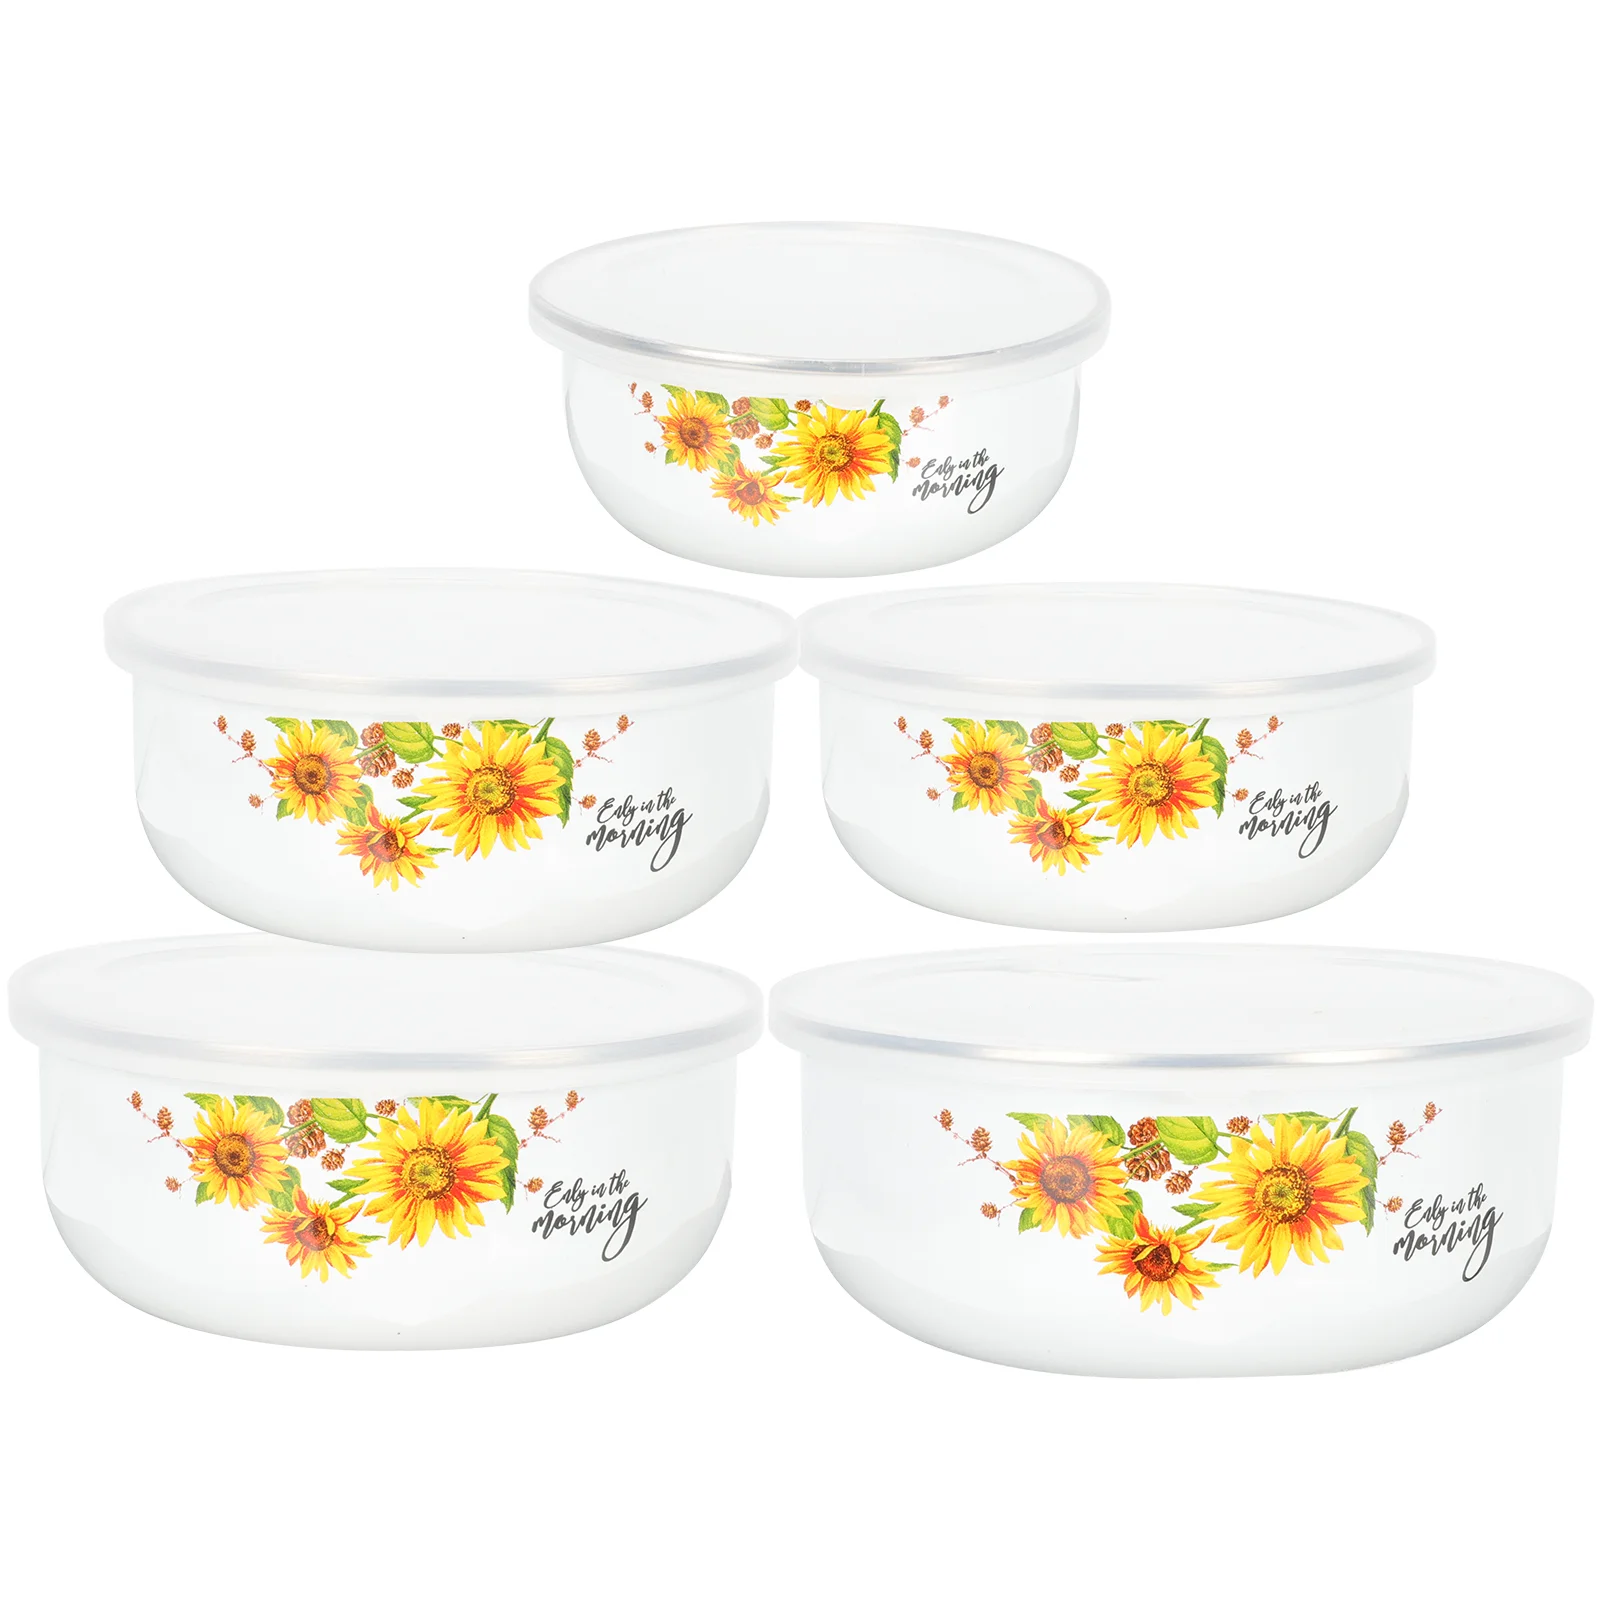 

Bowl Bowls Salad Mixing Enamel Noodle Soup Kitchen Lids Ceramic Instant Lid Basin Camping Container Rice Egg Keeping Fresh Box